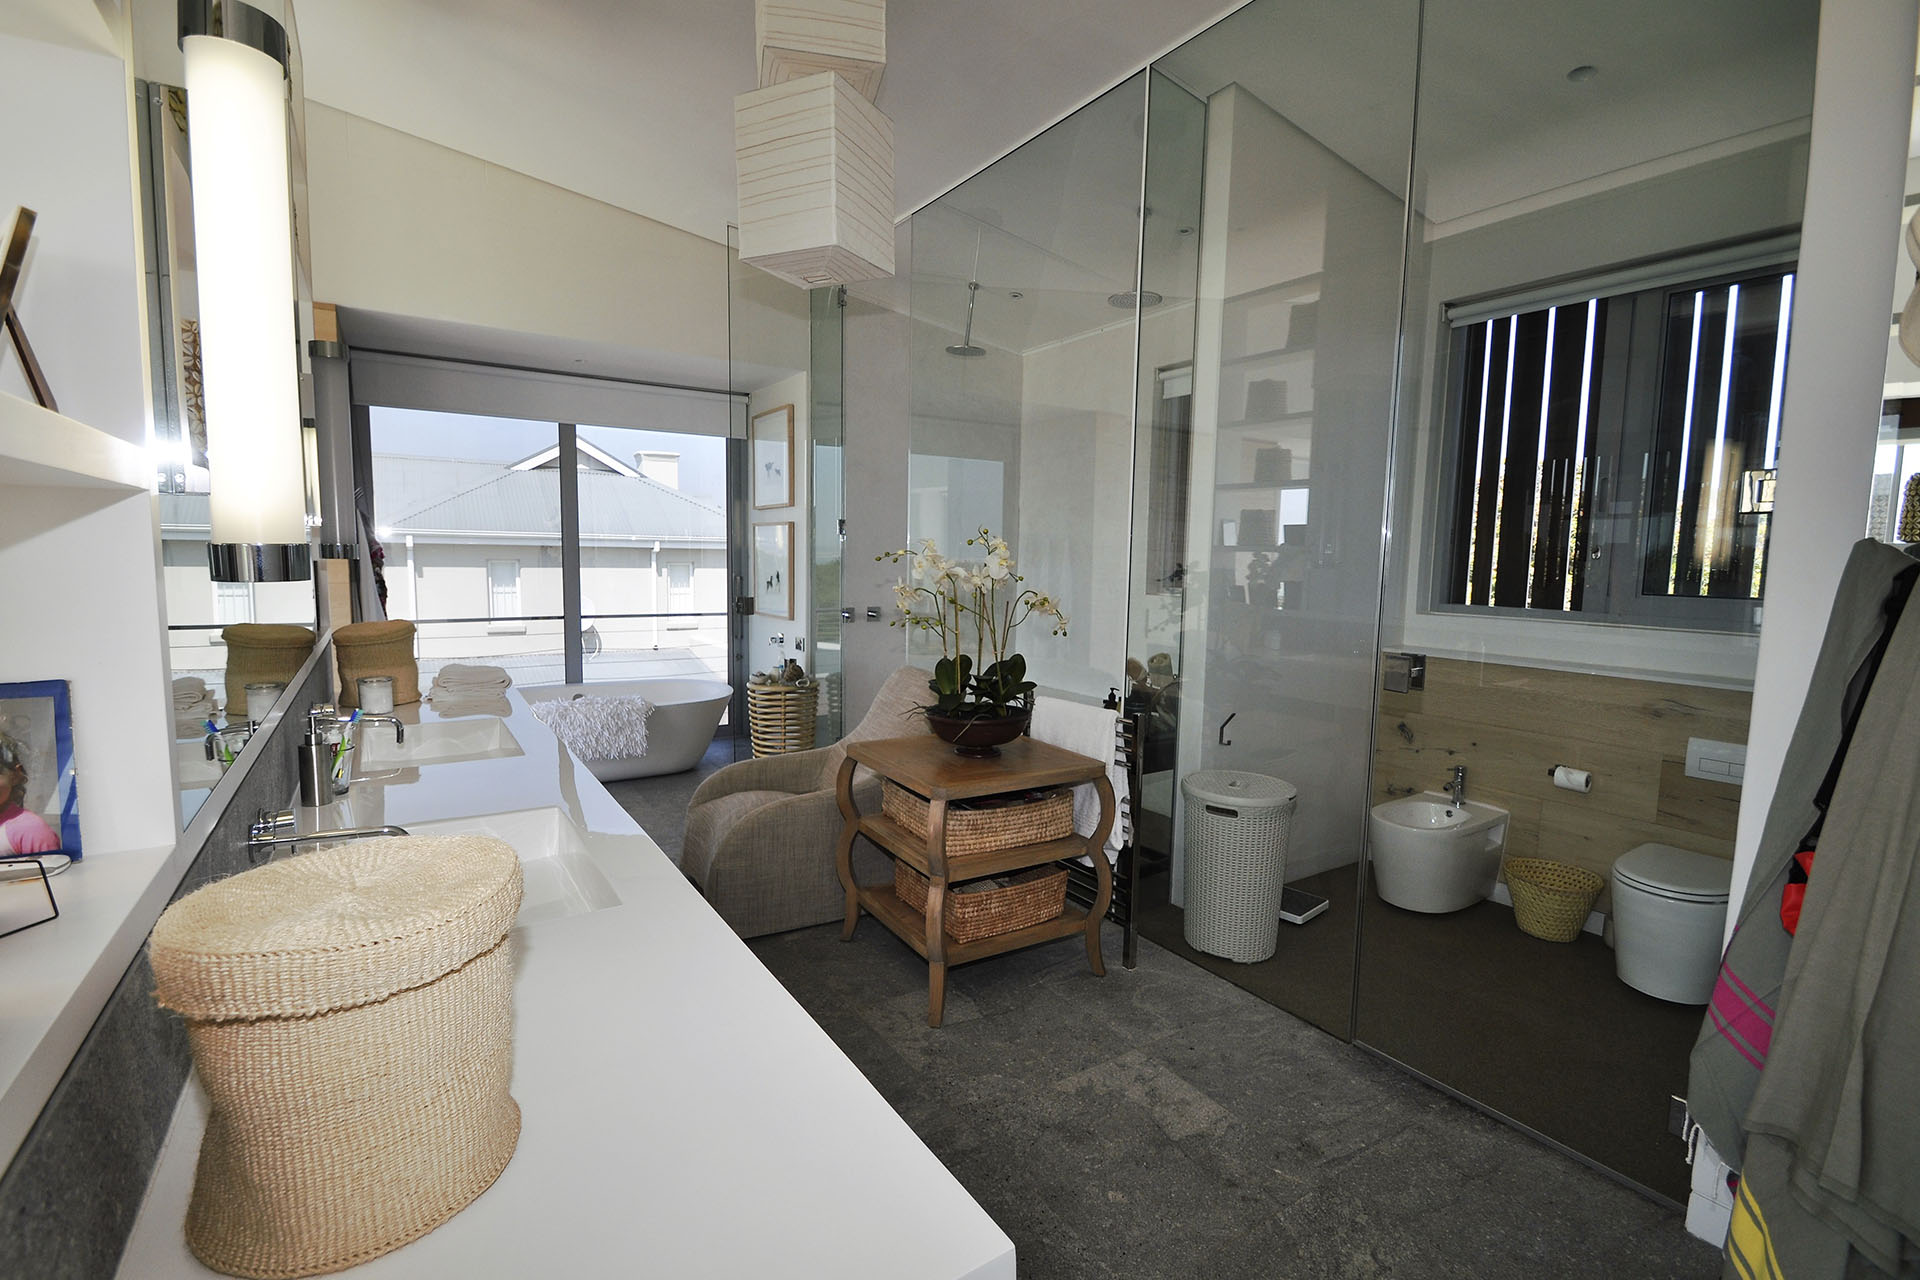 Photo 9 of The Dune House accommodation in Plettenberg Bay, Cape Town with 6 bedrooms and 7 bathrooms